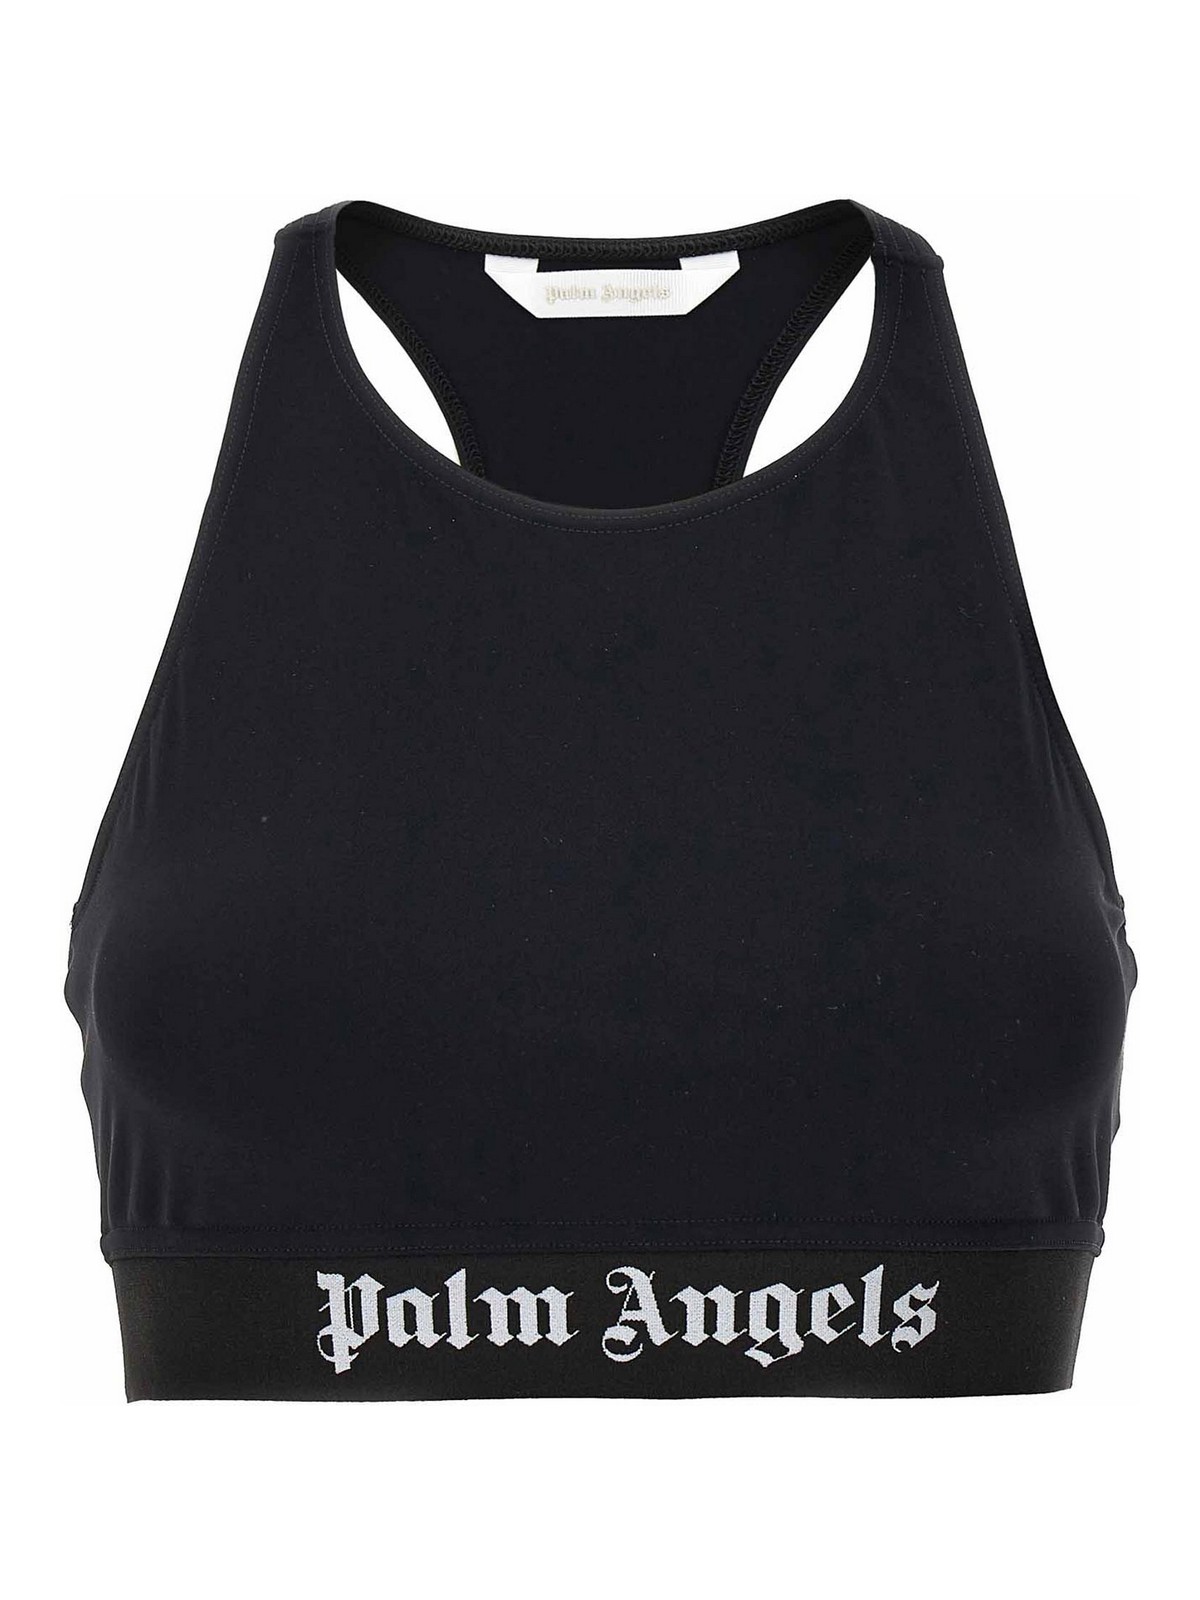 Palm Angels Logo Sports Top In Black